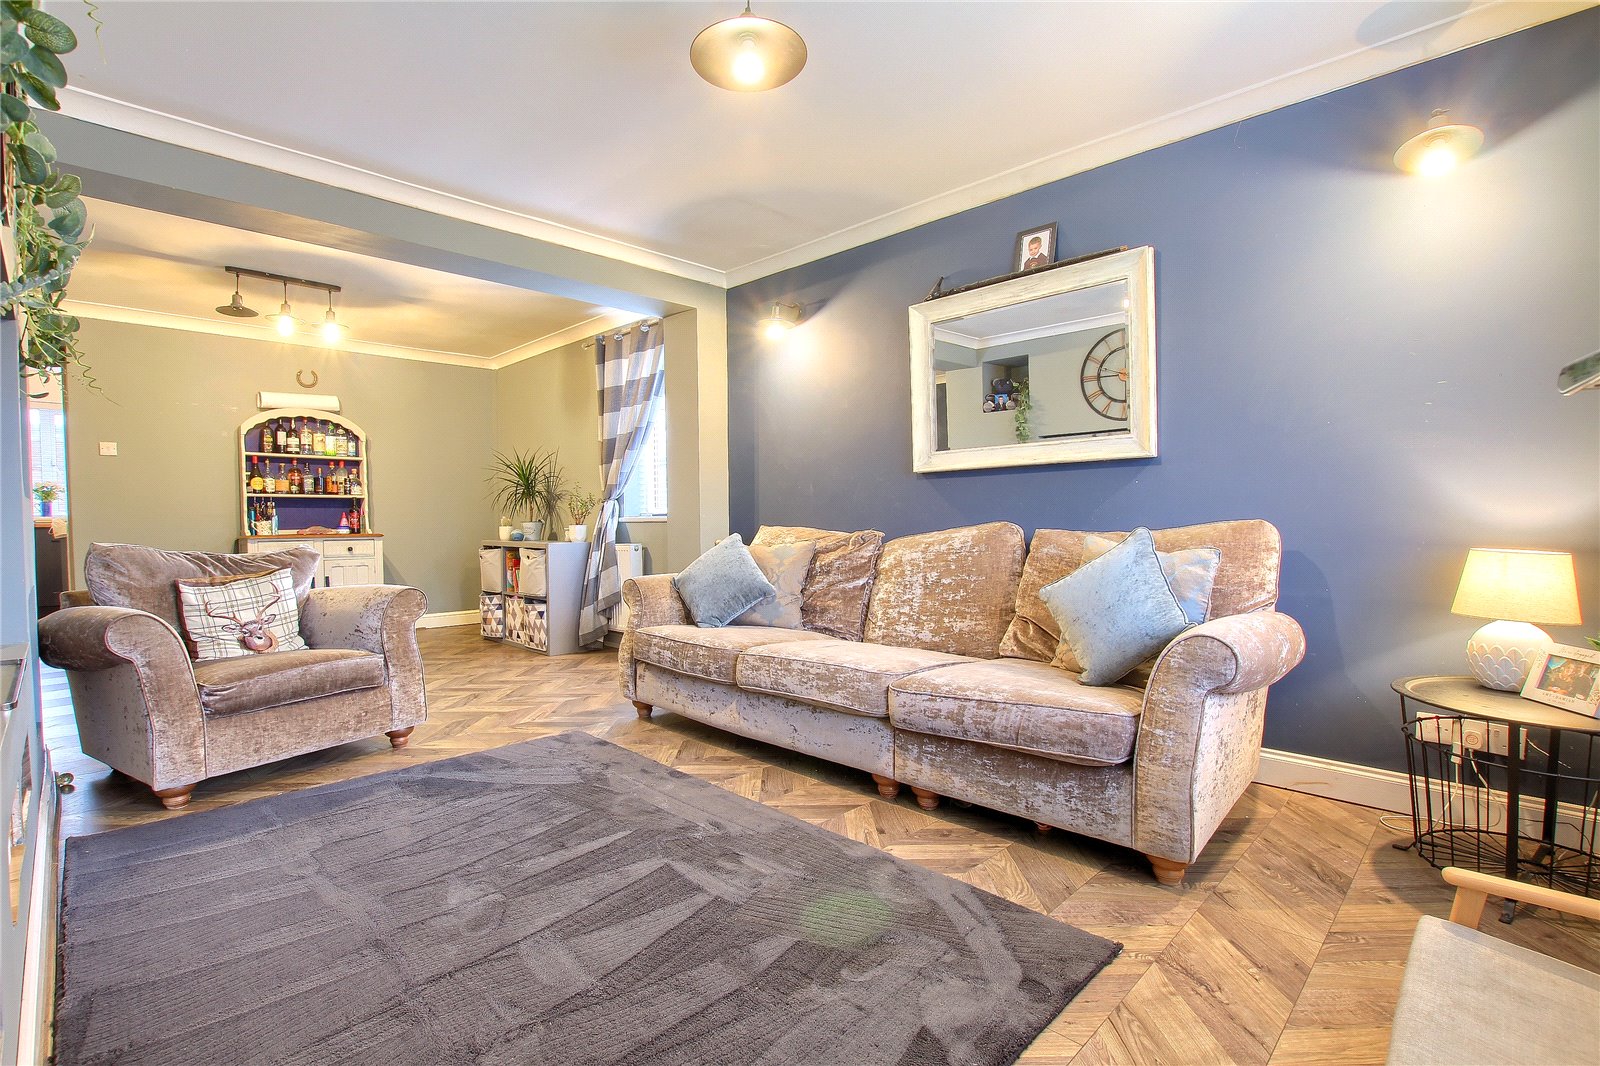 3 bed house for sale  - Property Image 2